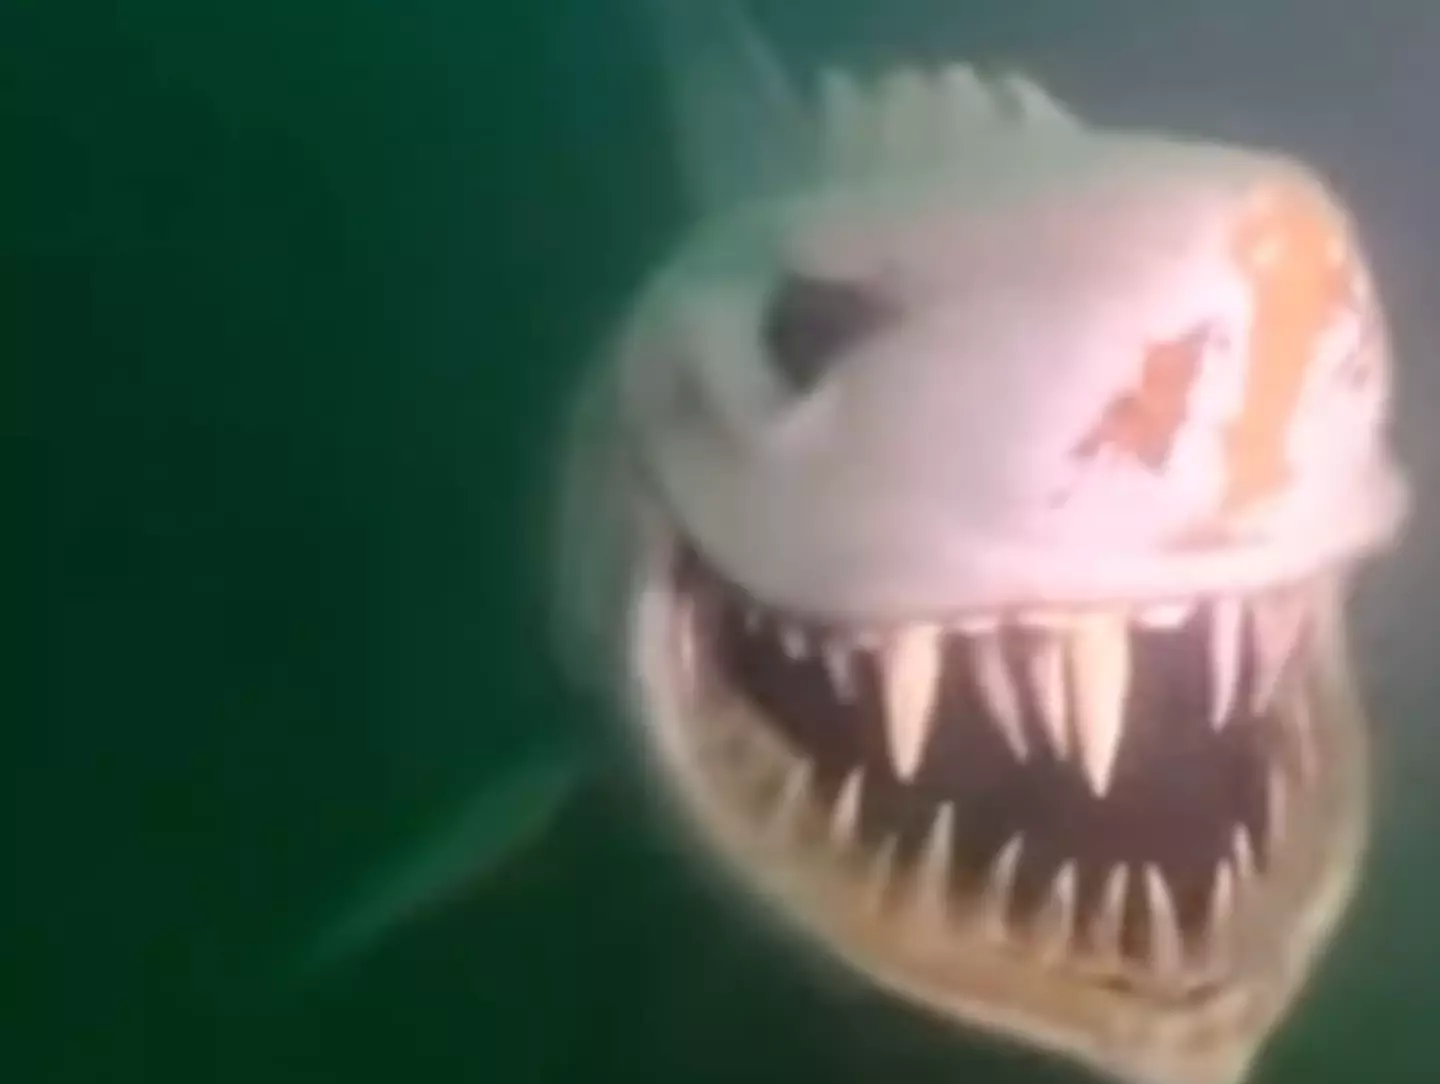 Social media users have been in hysterics after a video showing the shark has begun circulating on Instagram.